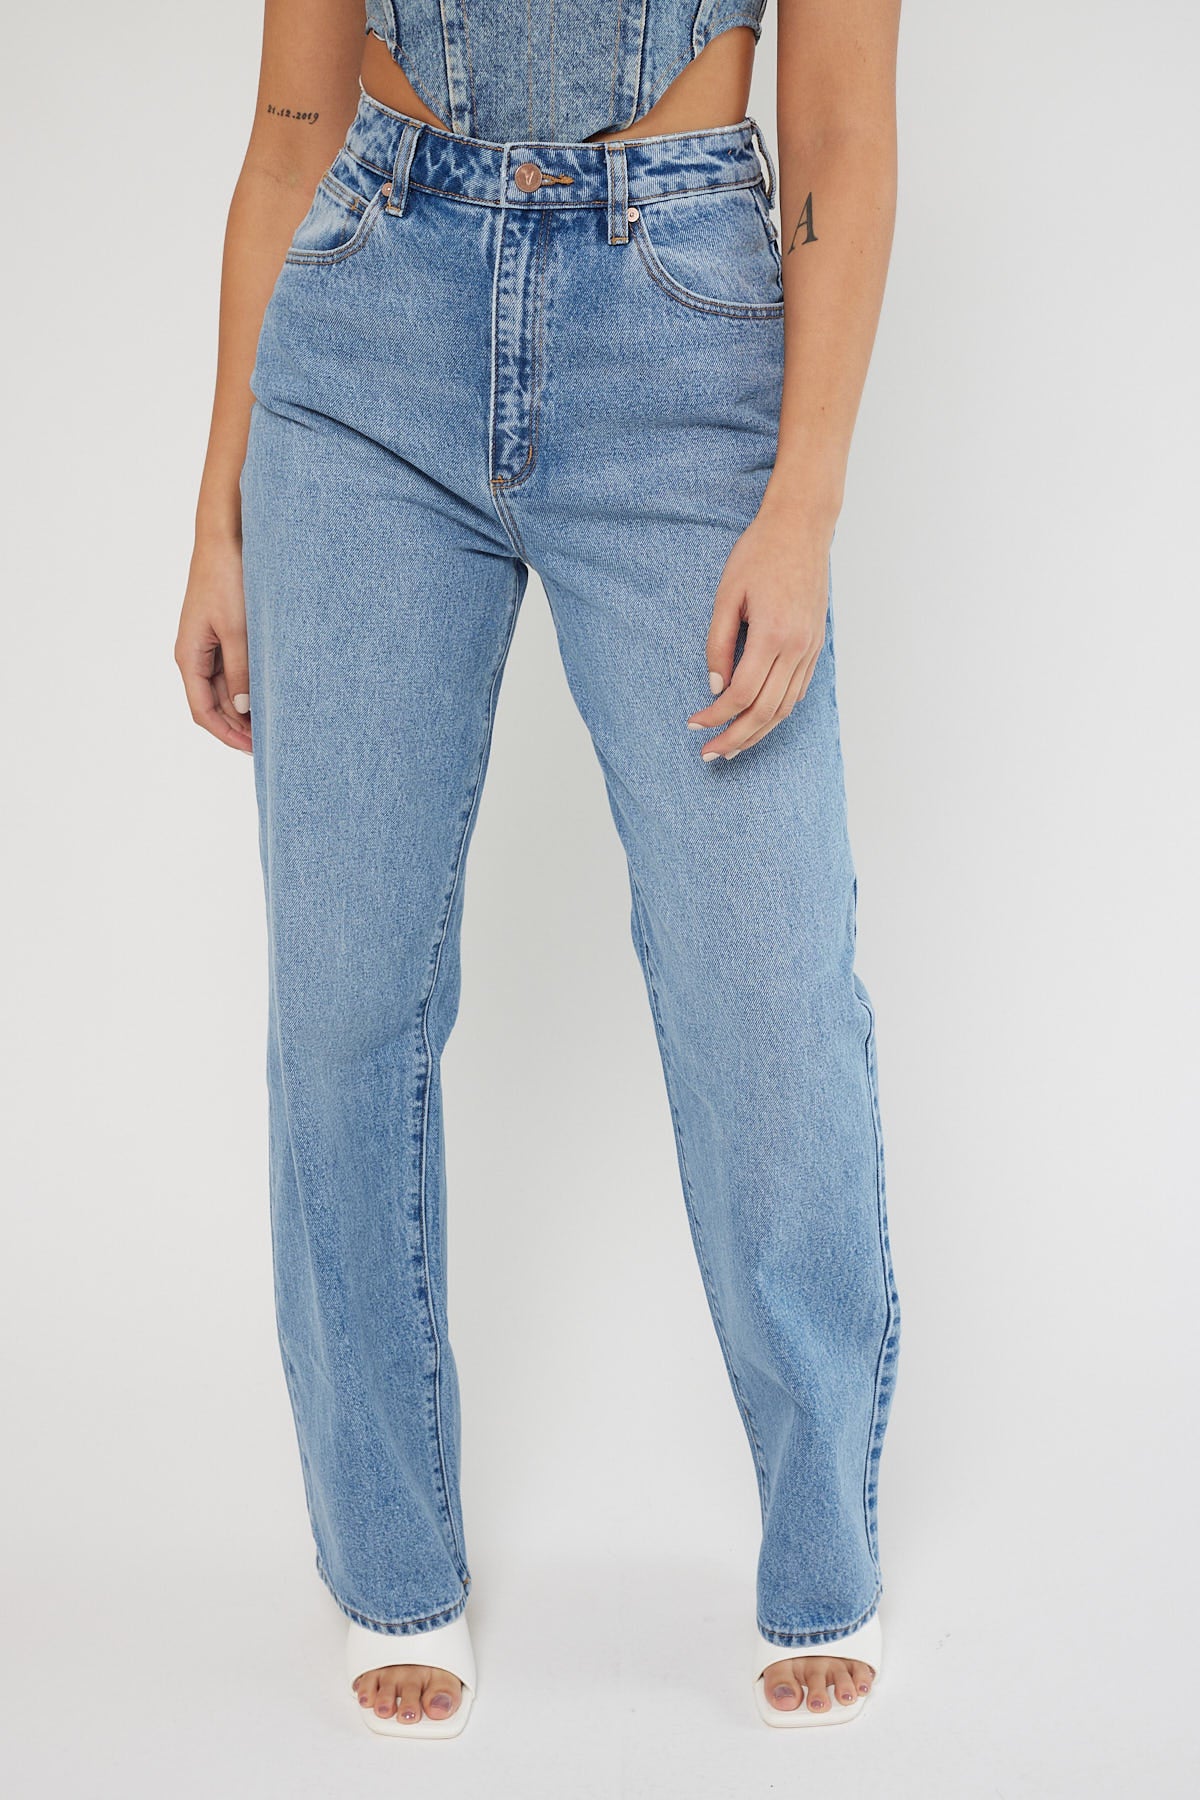 Abrand A Carrie Jean Maggie Organic – Universal Store